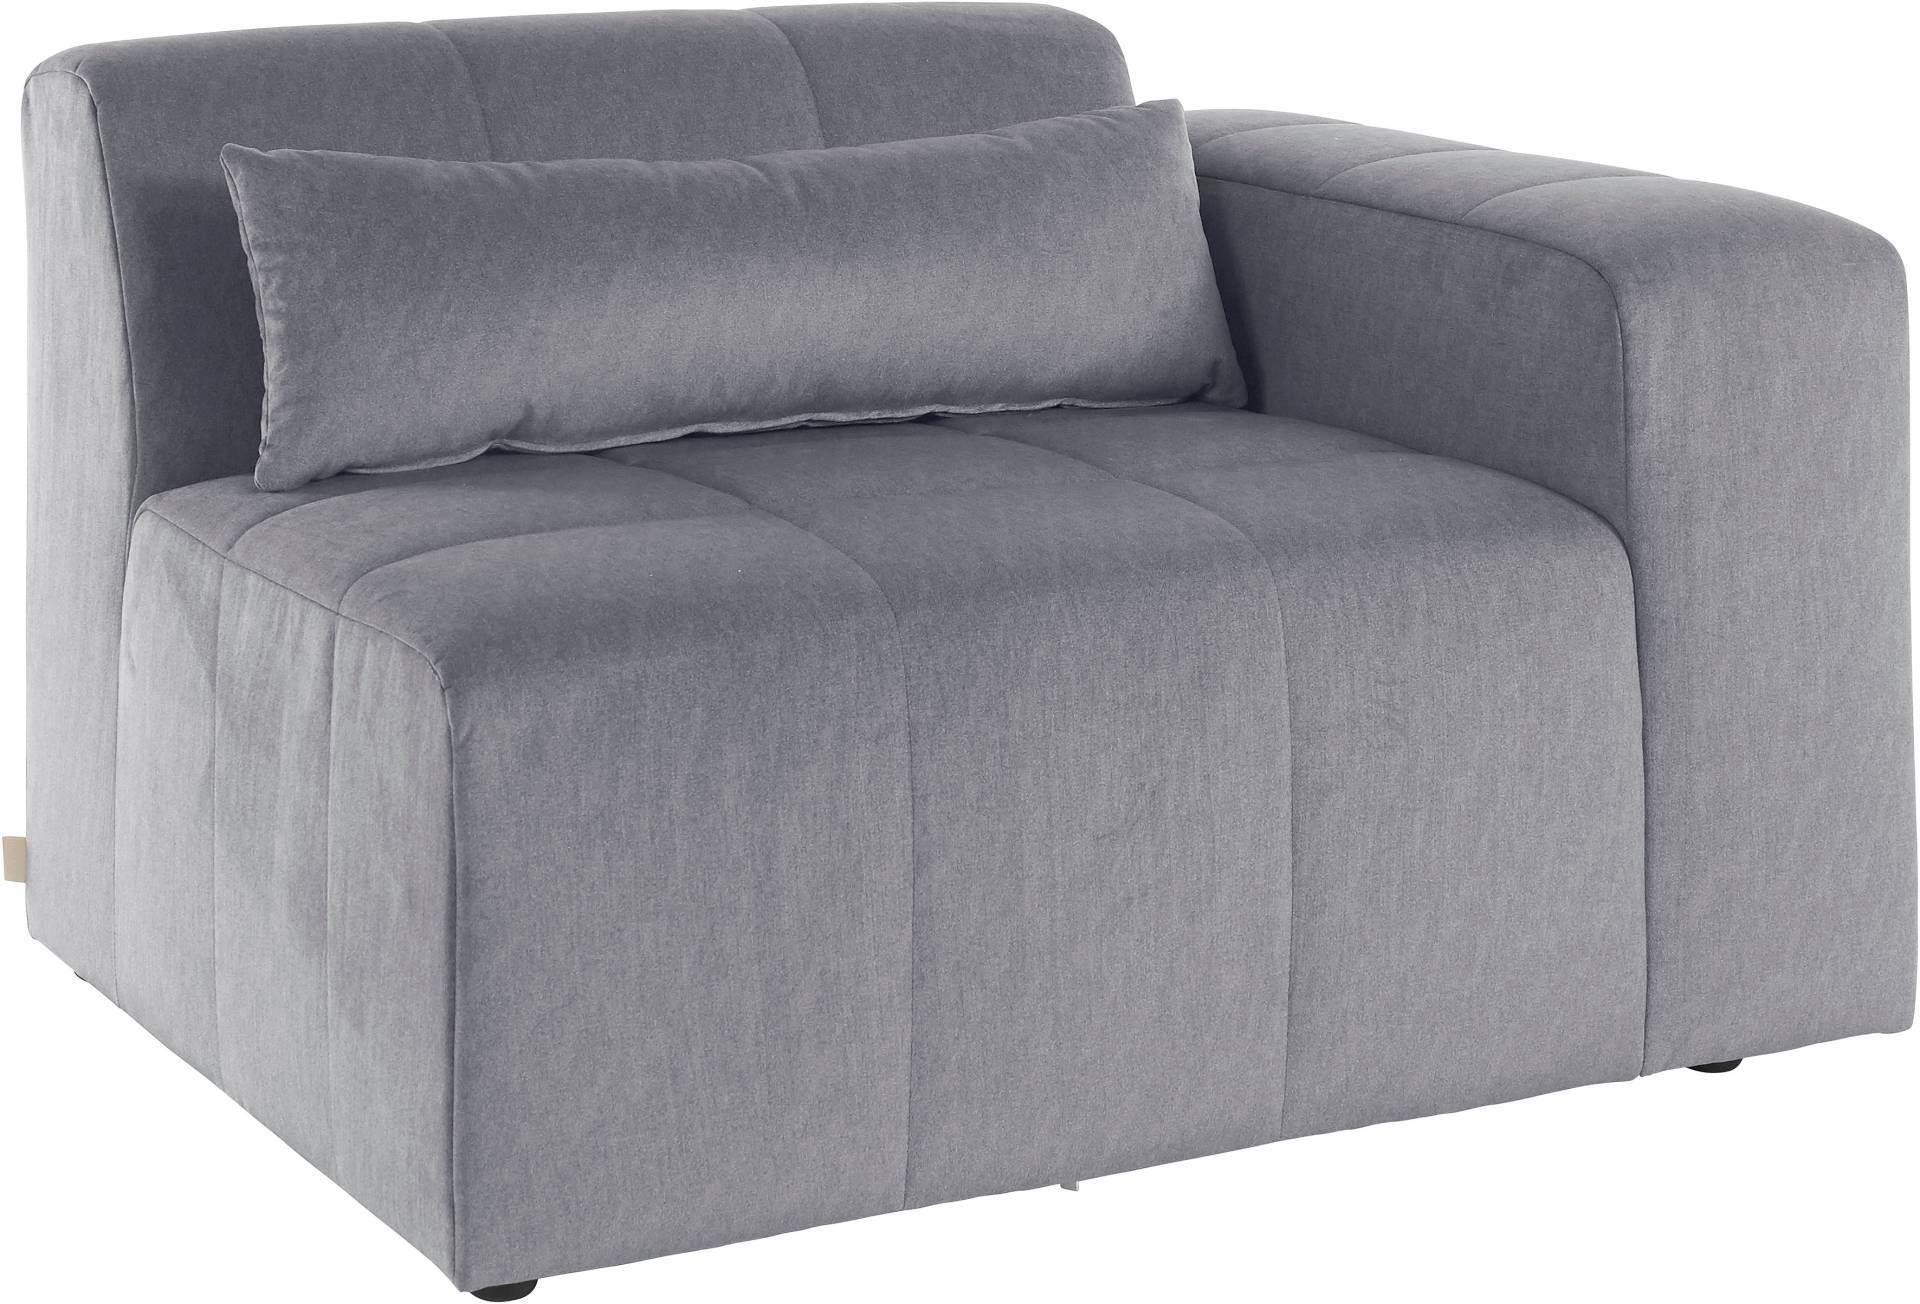 LeGer Home by Lena Gercke Sofaelement »Maileen« von LeGer Home by Lena Gercke